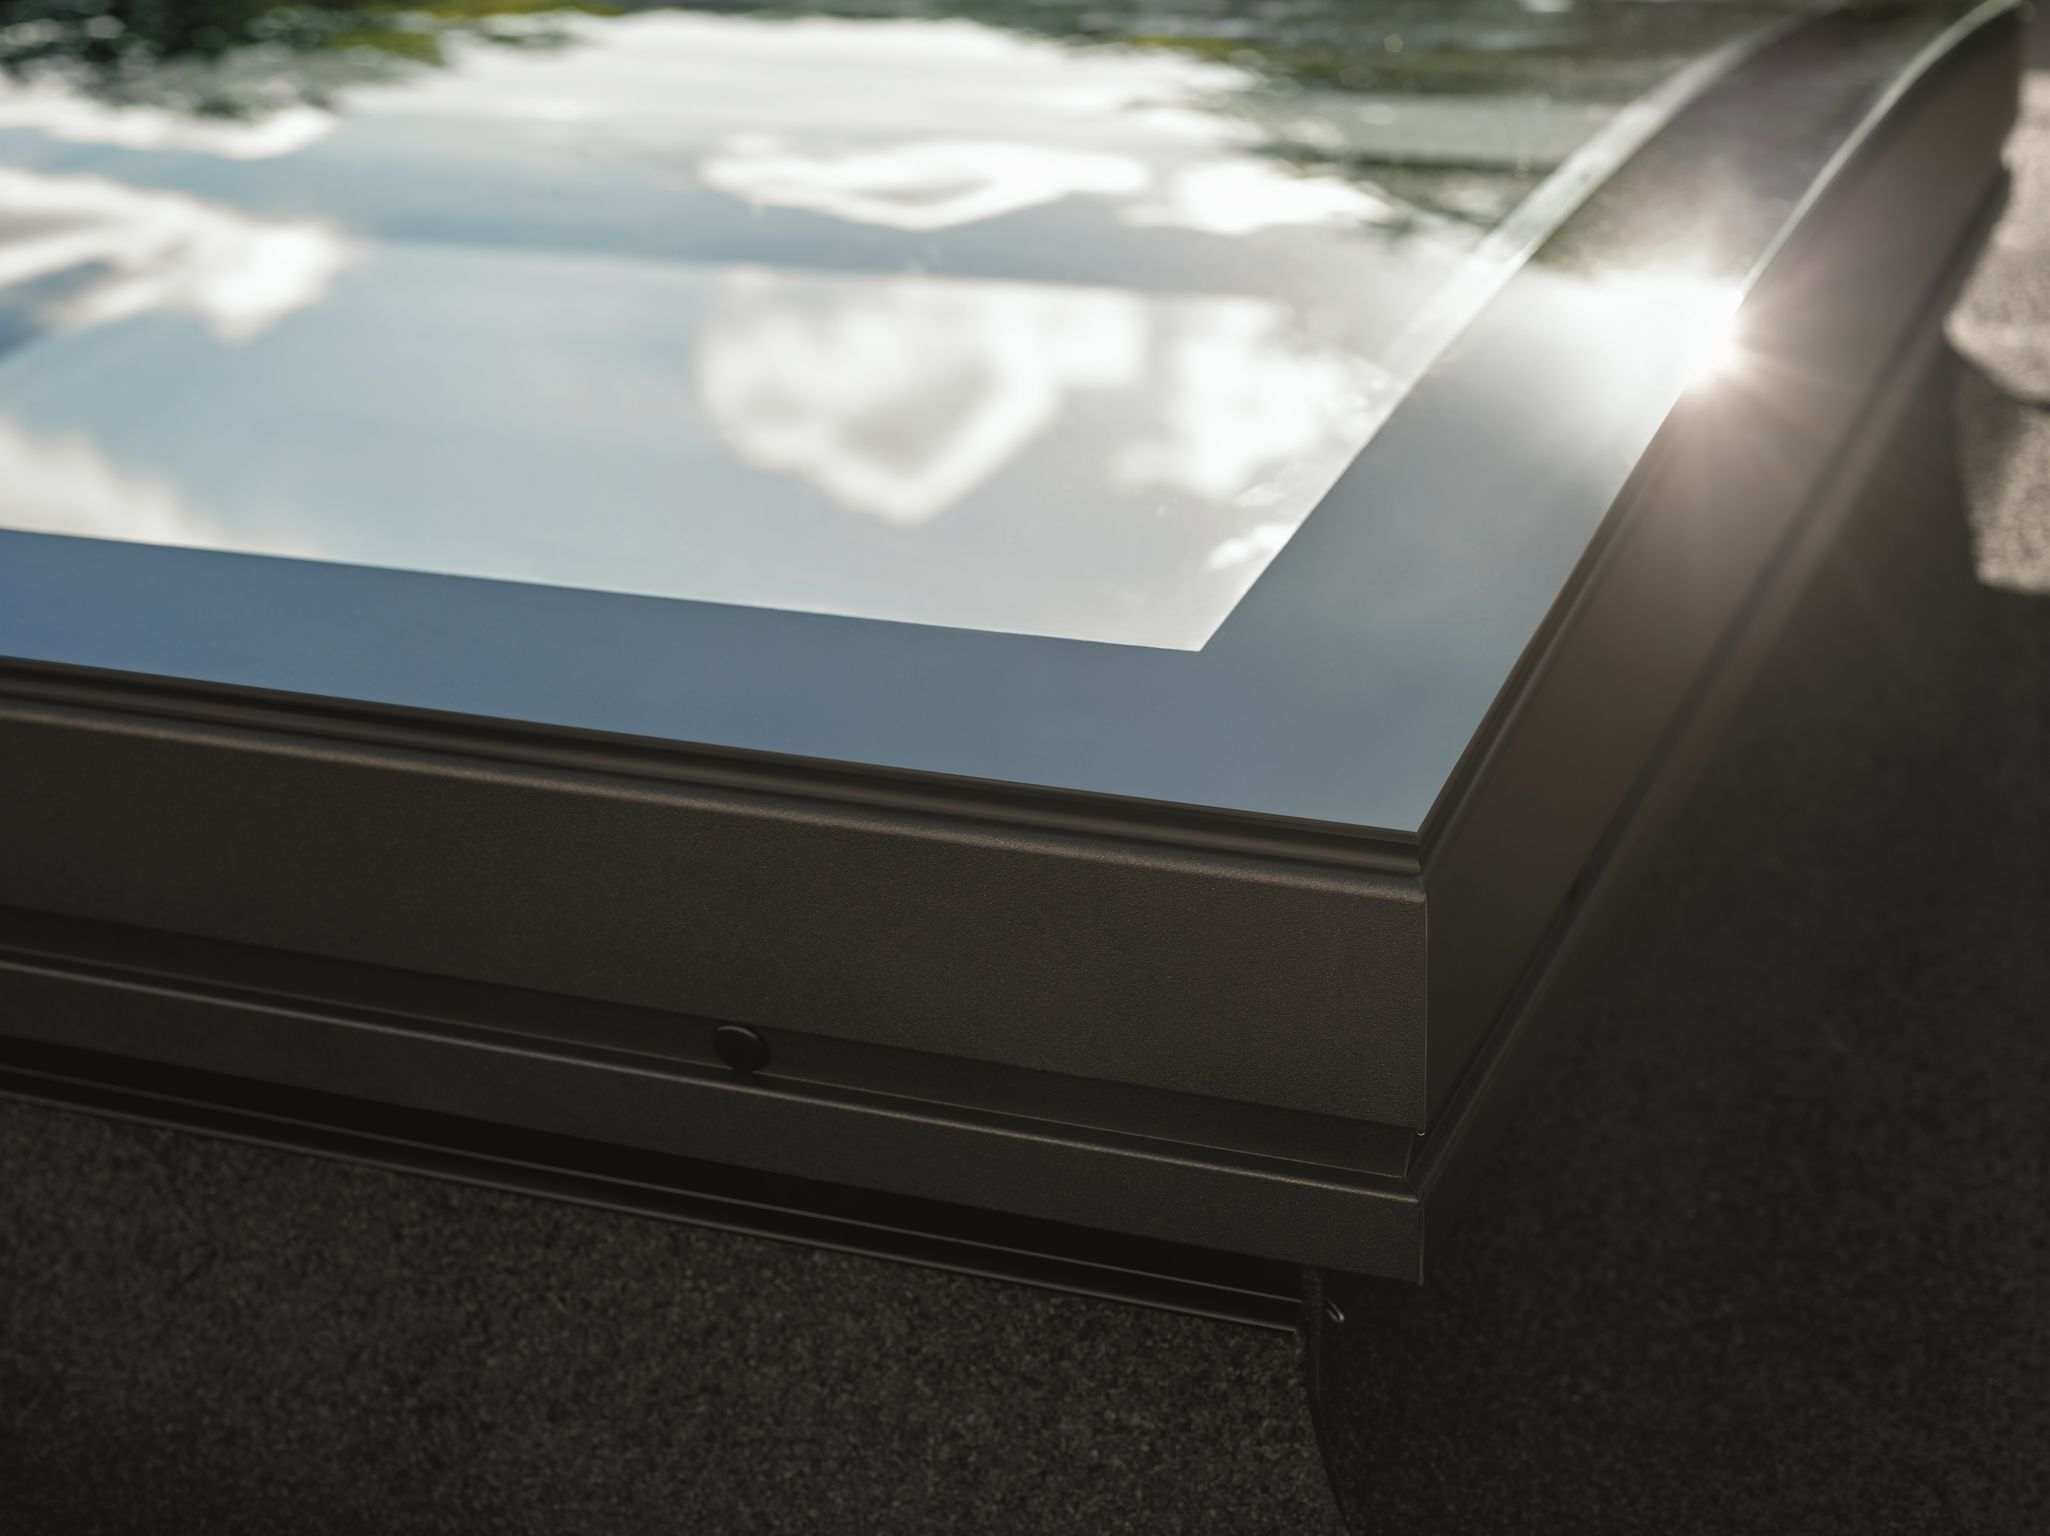 Curved glass rooflight